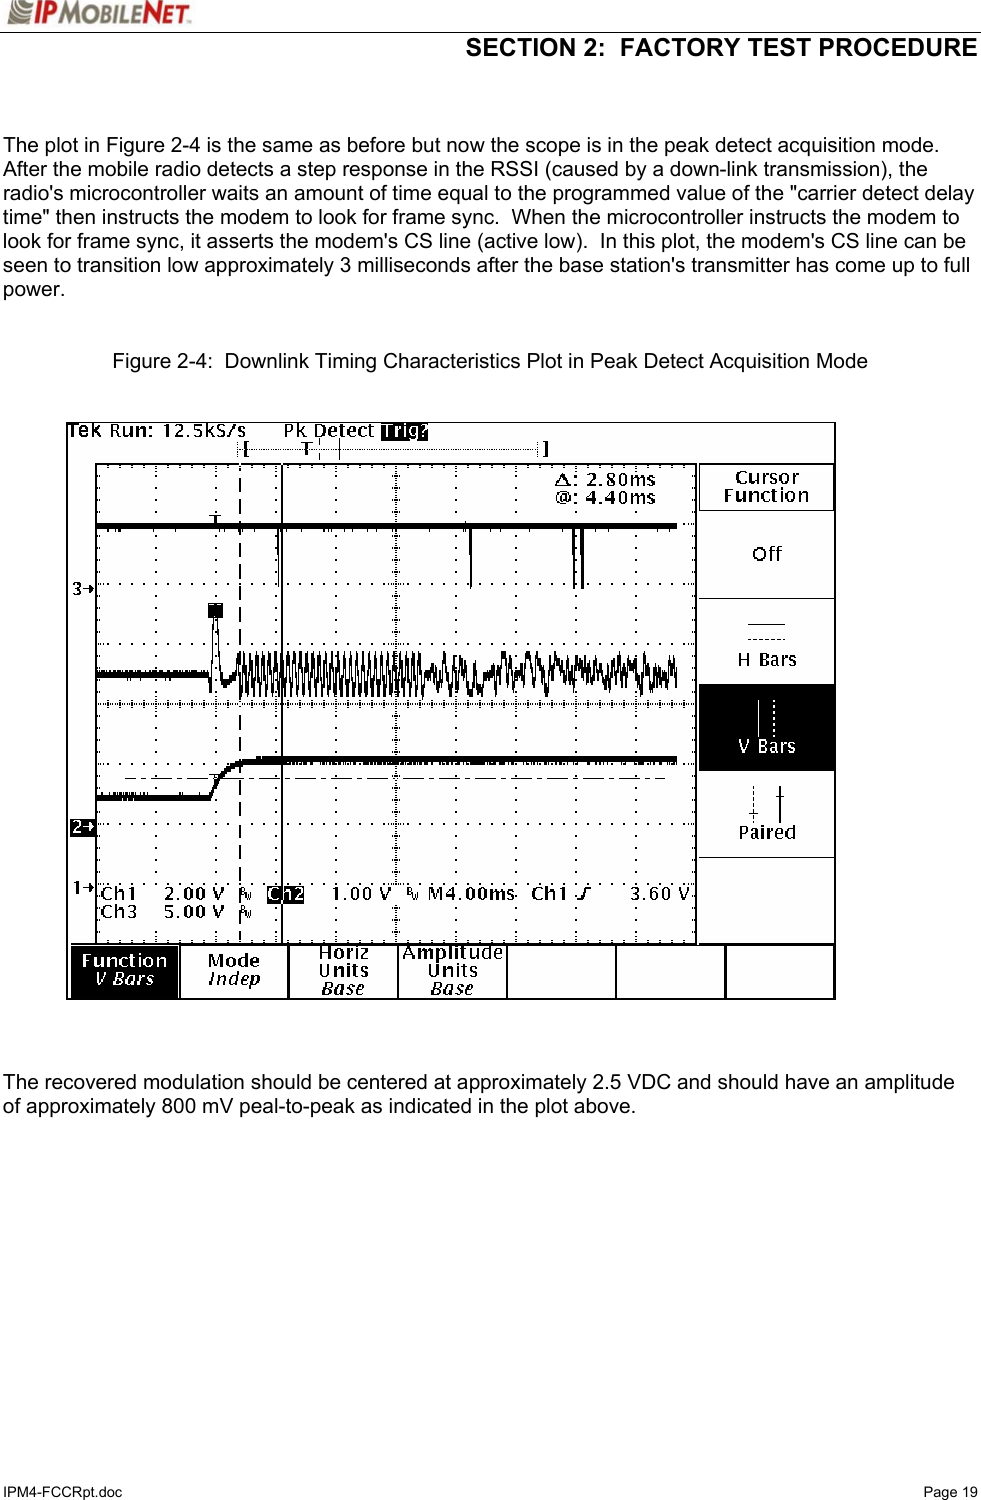   SECTION 2:  FACTORY TEST PROCEDURE  IPM4-FCCRpt.doc   Page 19   The plot in Figure 2-4 is the same as before but now the scope is in the peak detect acquisition mode.  After the mobile radio detects a step response in the RSSI (caused by a down-link transmission), the radio&apos;s microcontroller waits an amount of time equal to the programmed value of the &quot;carrier detect delay time&quot; then instructs the modem to look for frame sync.  When the microcontroller instructs the modem to look for frame sync, it asserts the modem&apos;s CS line (active low).  In this plot, the modem&apos;s CS line can be seen to transition low approximately 3 milliseconds after the base station&apos;s transmitter has come up to full power.    Figure 2-4:  Downlink Timing Characteristics Plot in Peak Detect Acquisition Mode      The recovered modulation should be centered at approximately 2.5 VDC and should have an amplitude of approximately 800 mV peal-to-peak as indicated in the plot above.